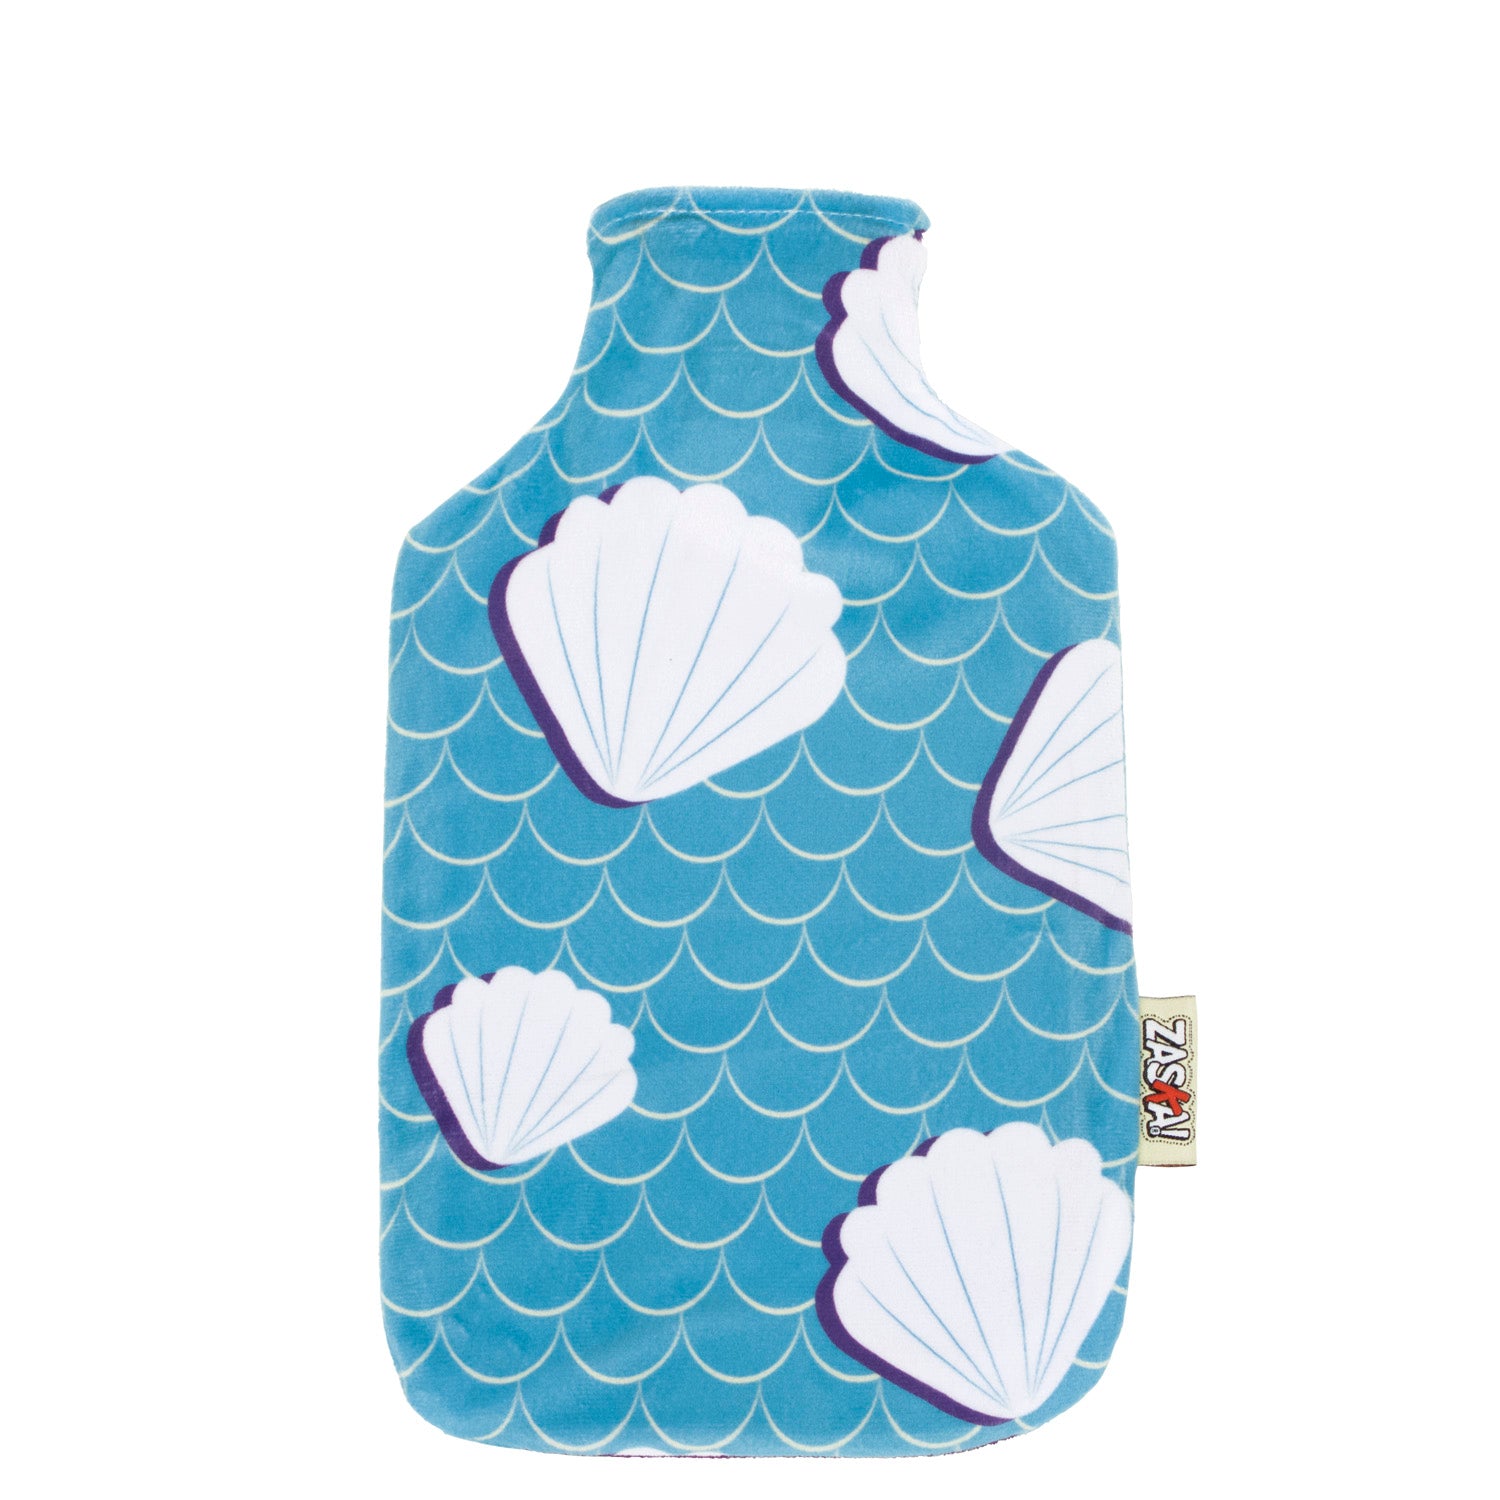 Mermaid Hot Water Bottle With Soft Textile Cover by Zaska